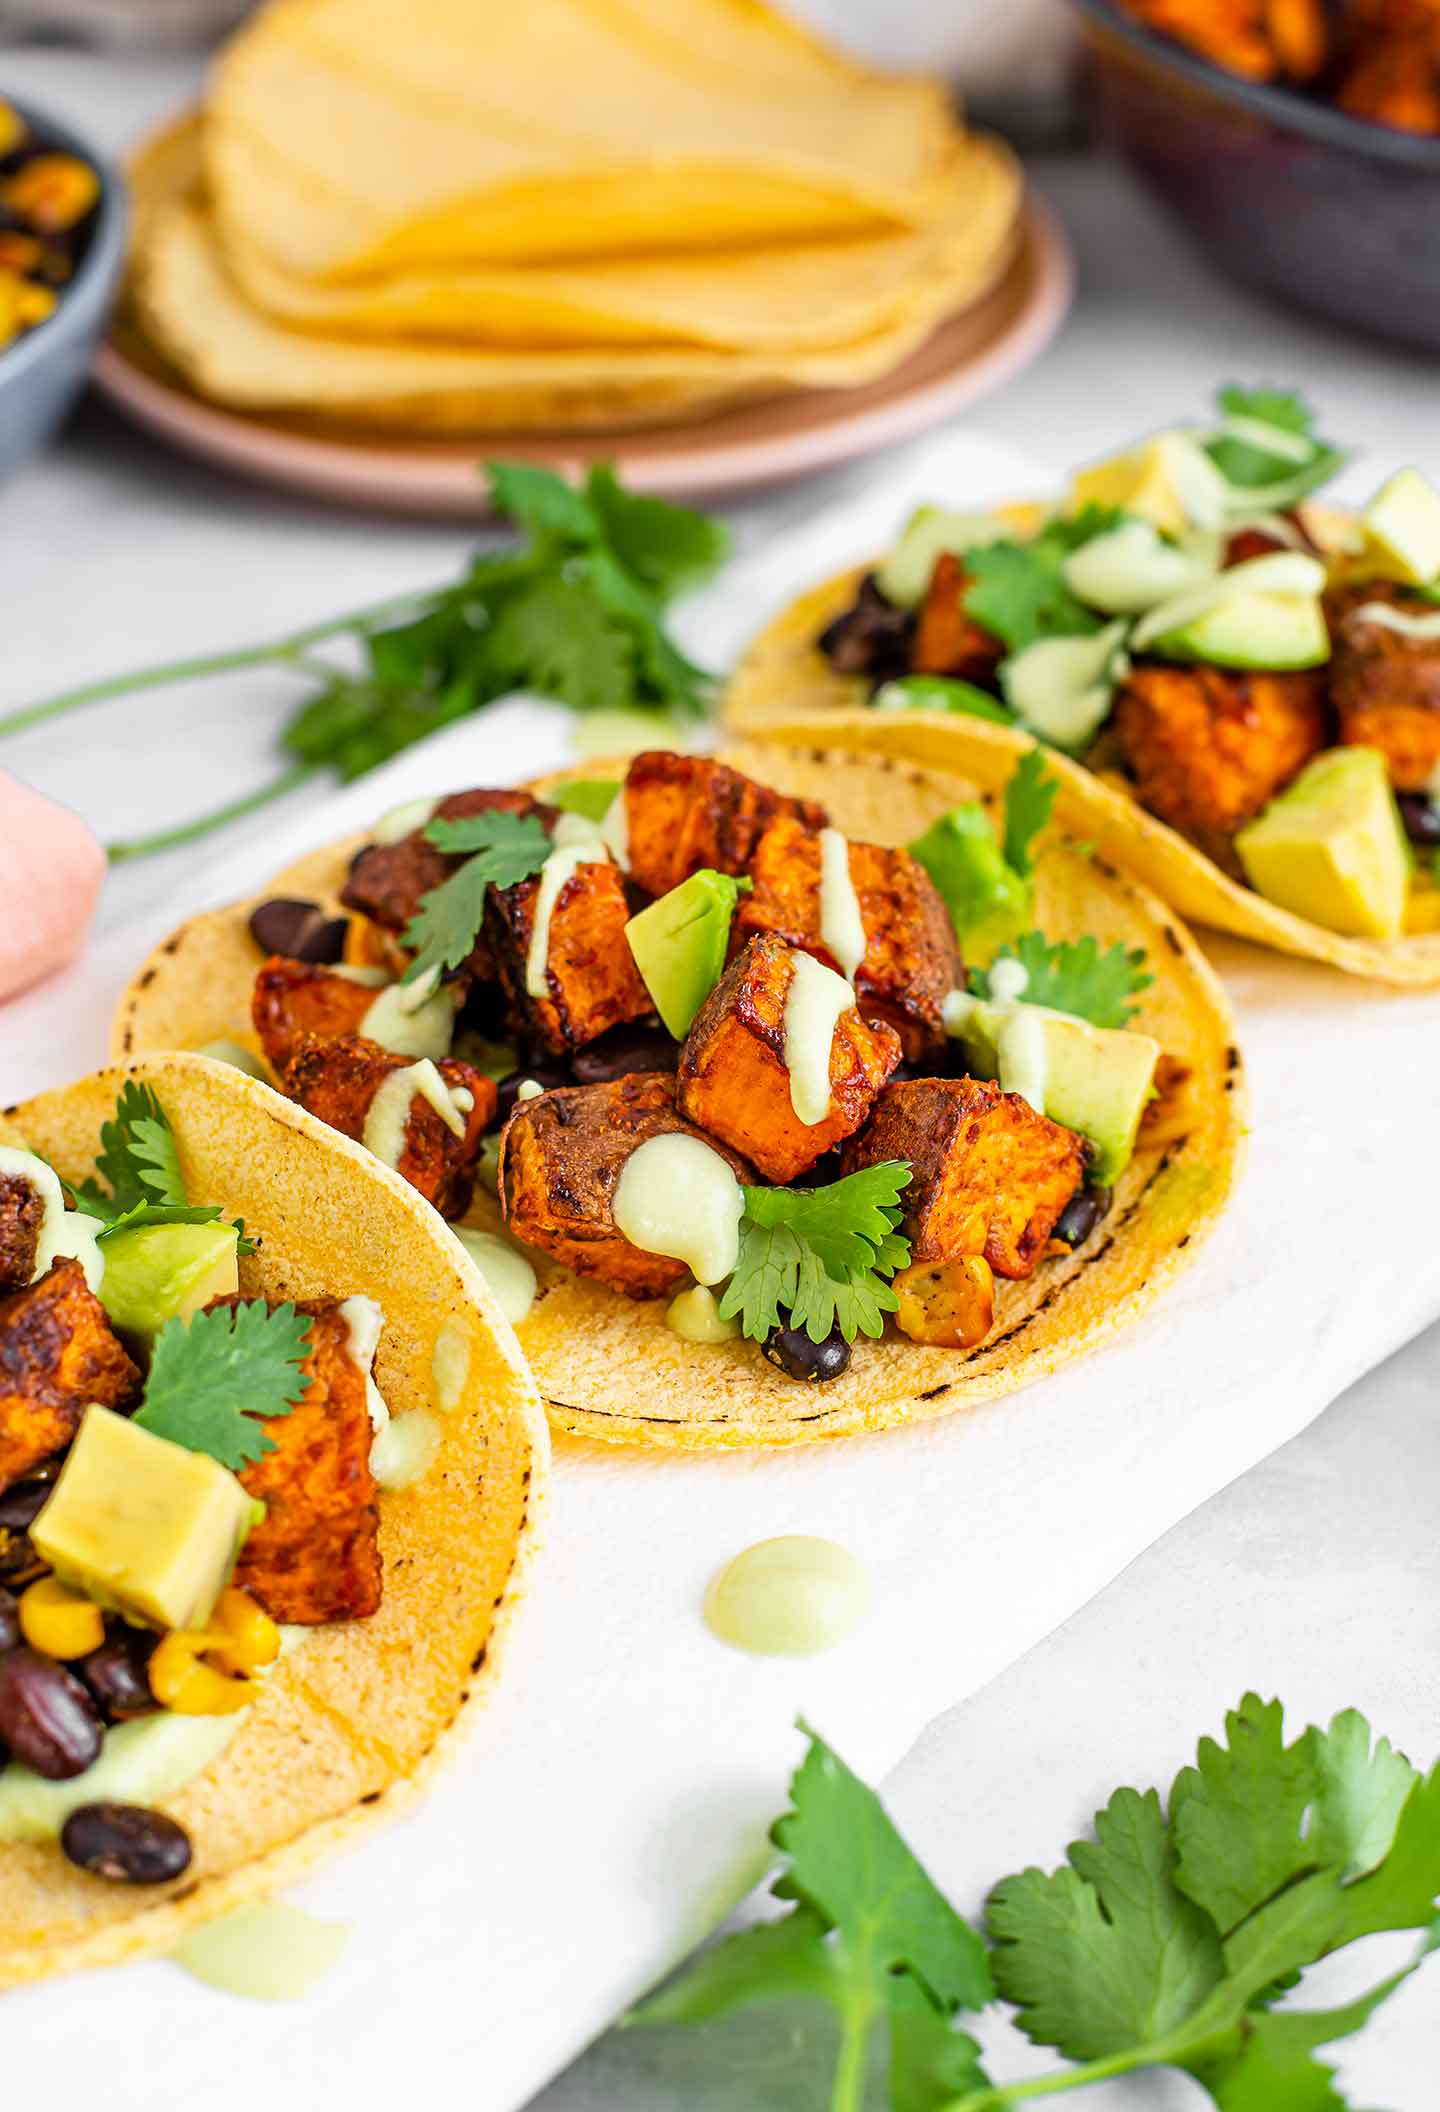 Side view of three roasted sweet potato black beans tacos on a white tray. Extra corn tortillas are in the background and the colourful tacos are drizzled with a creamy dressing.